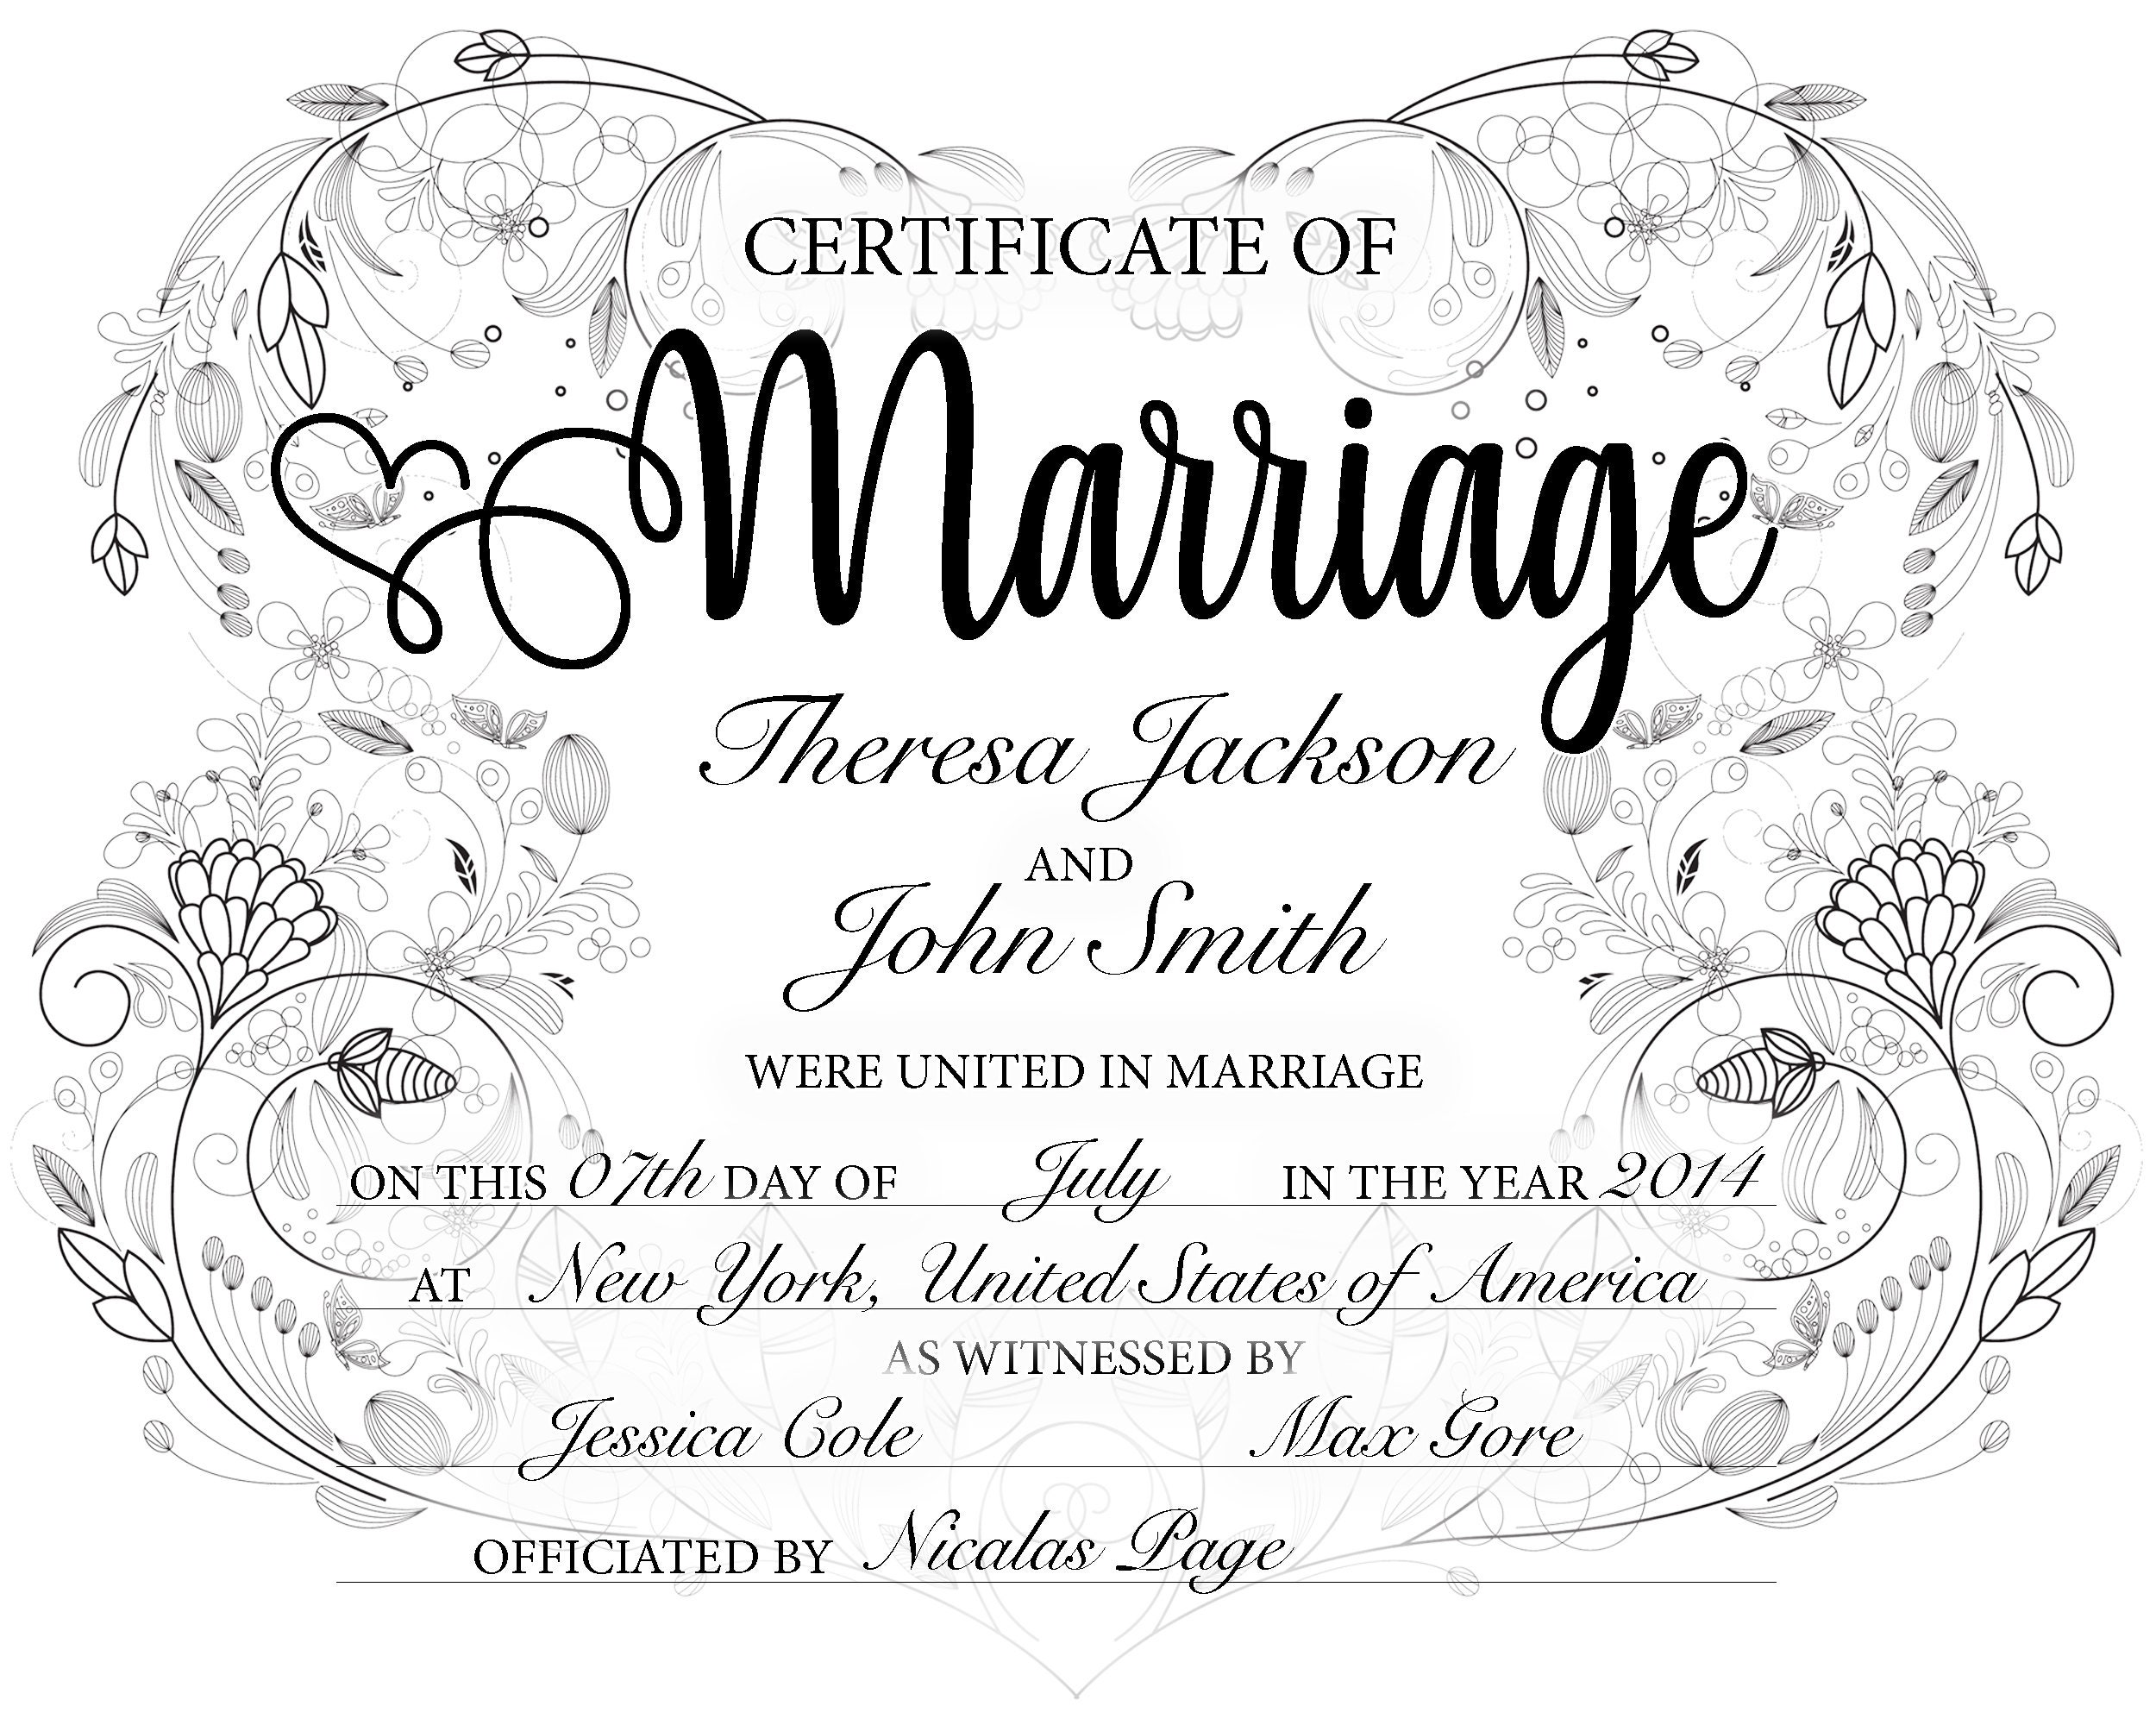 Marriage Certificate Editable Template, online instant download, digital  sample gift for wedding With Regard To Certificate Of Marriage Template